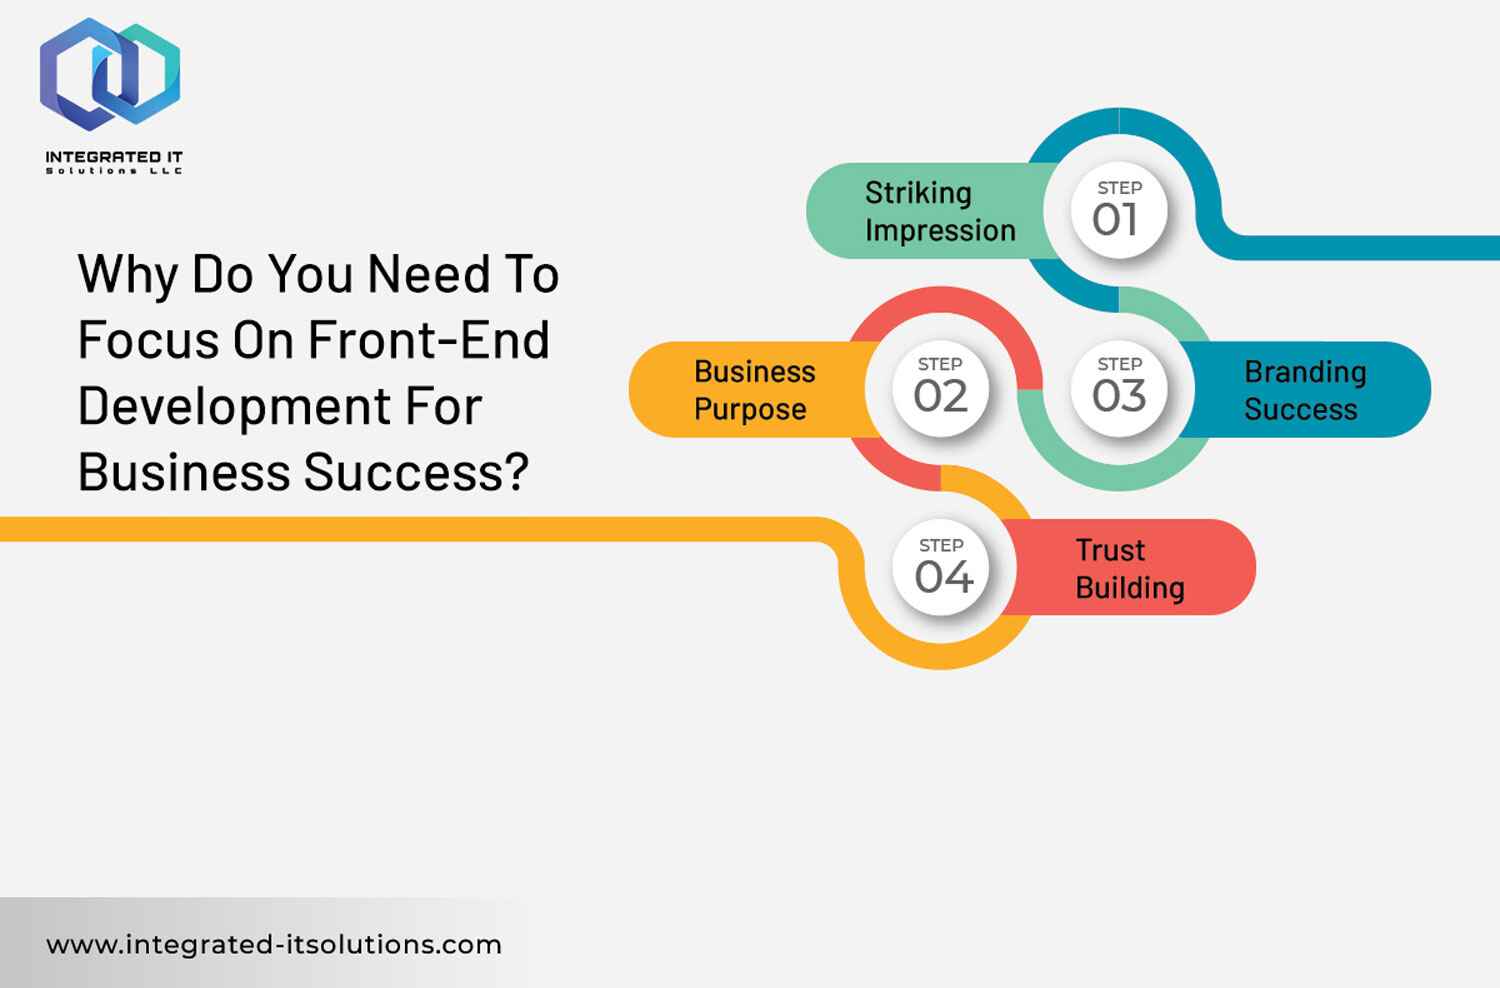 Why Do You Need To Focus On Front-End Development For Business Success?